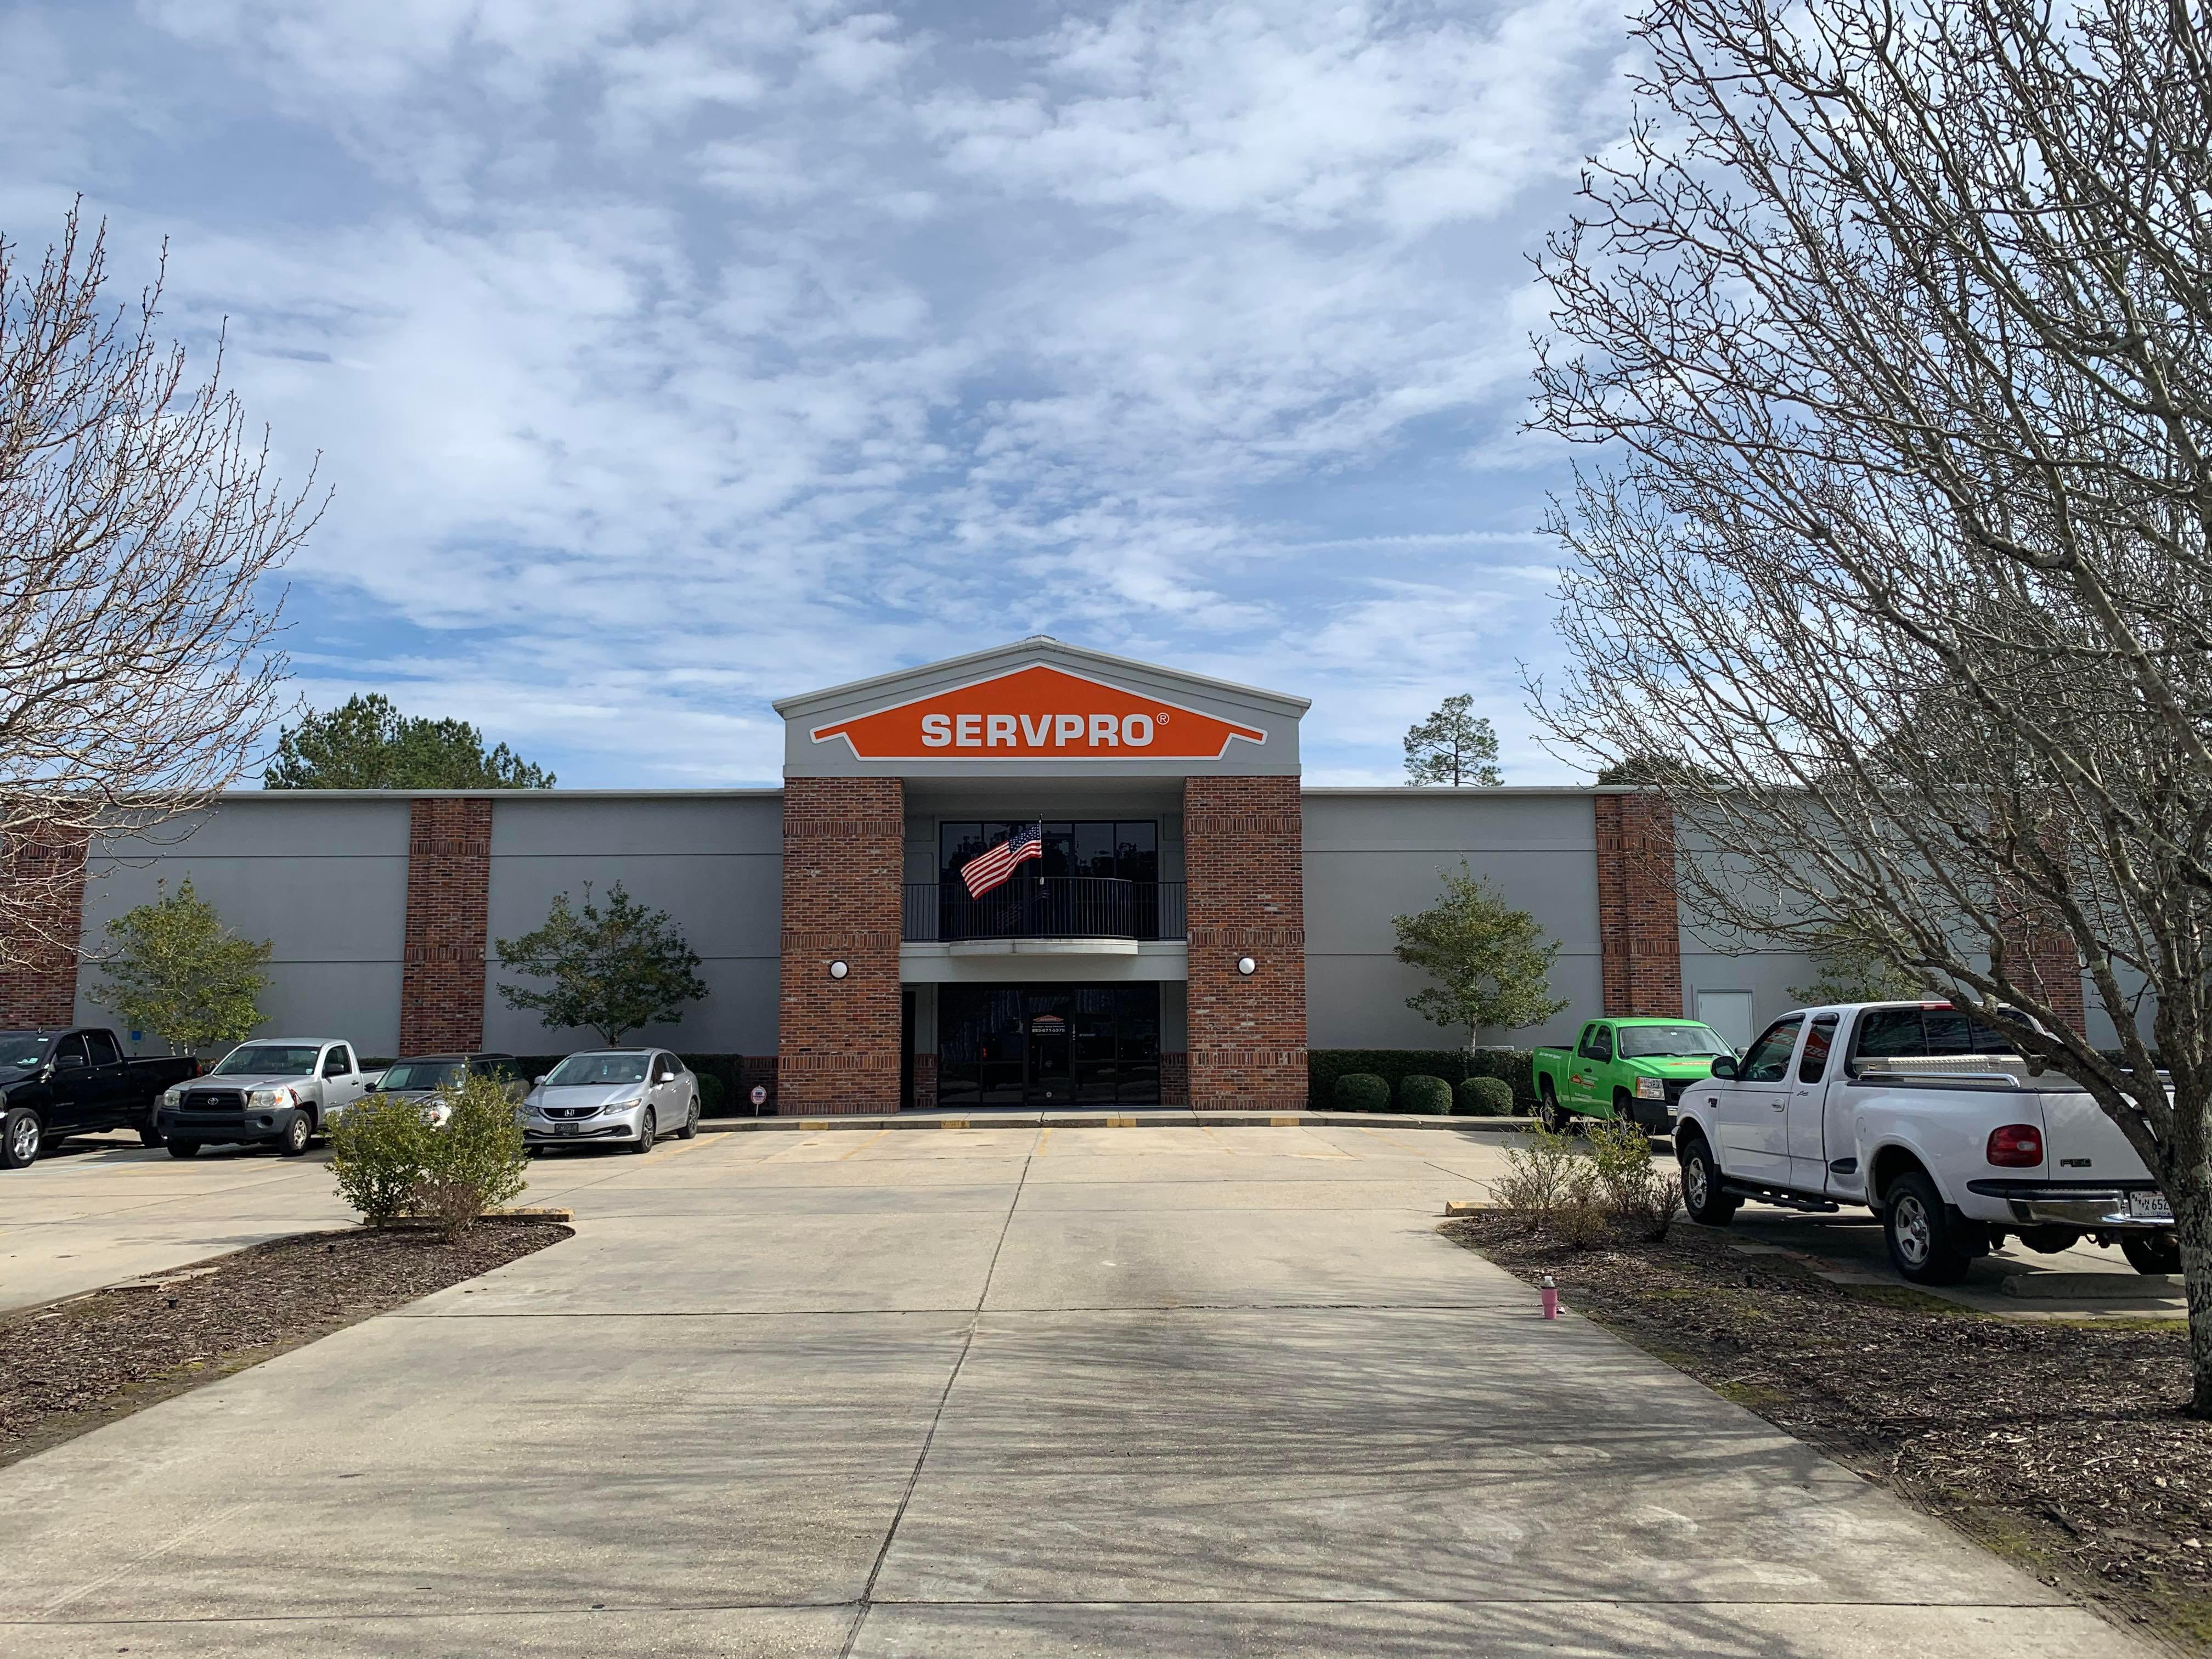 SERVPRO of Greater Covington and Mandeville's fifteen thousand square foot climate-controlled office building is located at 68424 James Street in Mandeville, Louisiana.